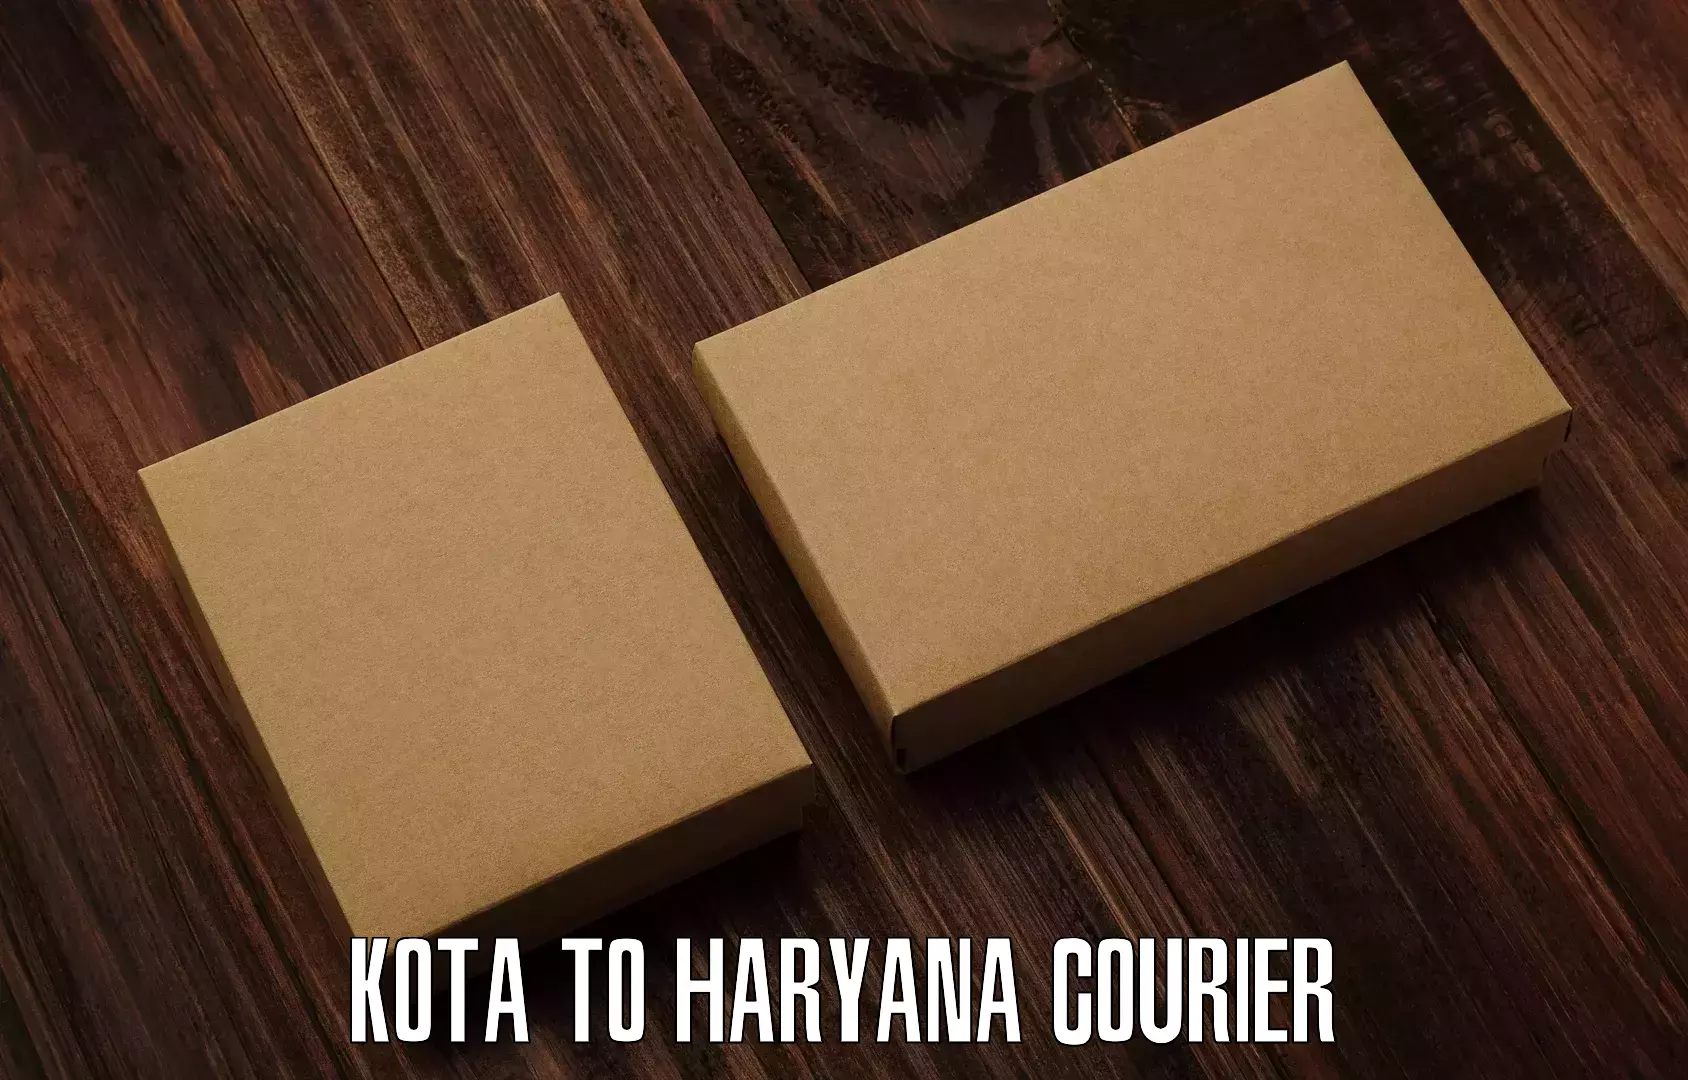 Business delivery service Kota to Chirya